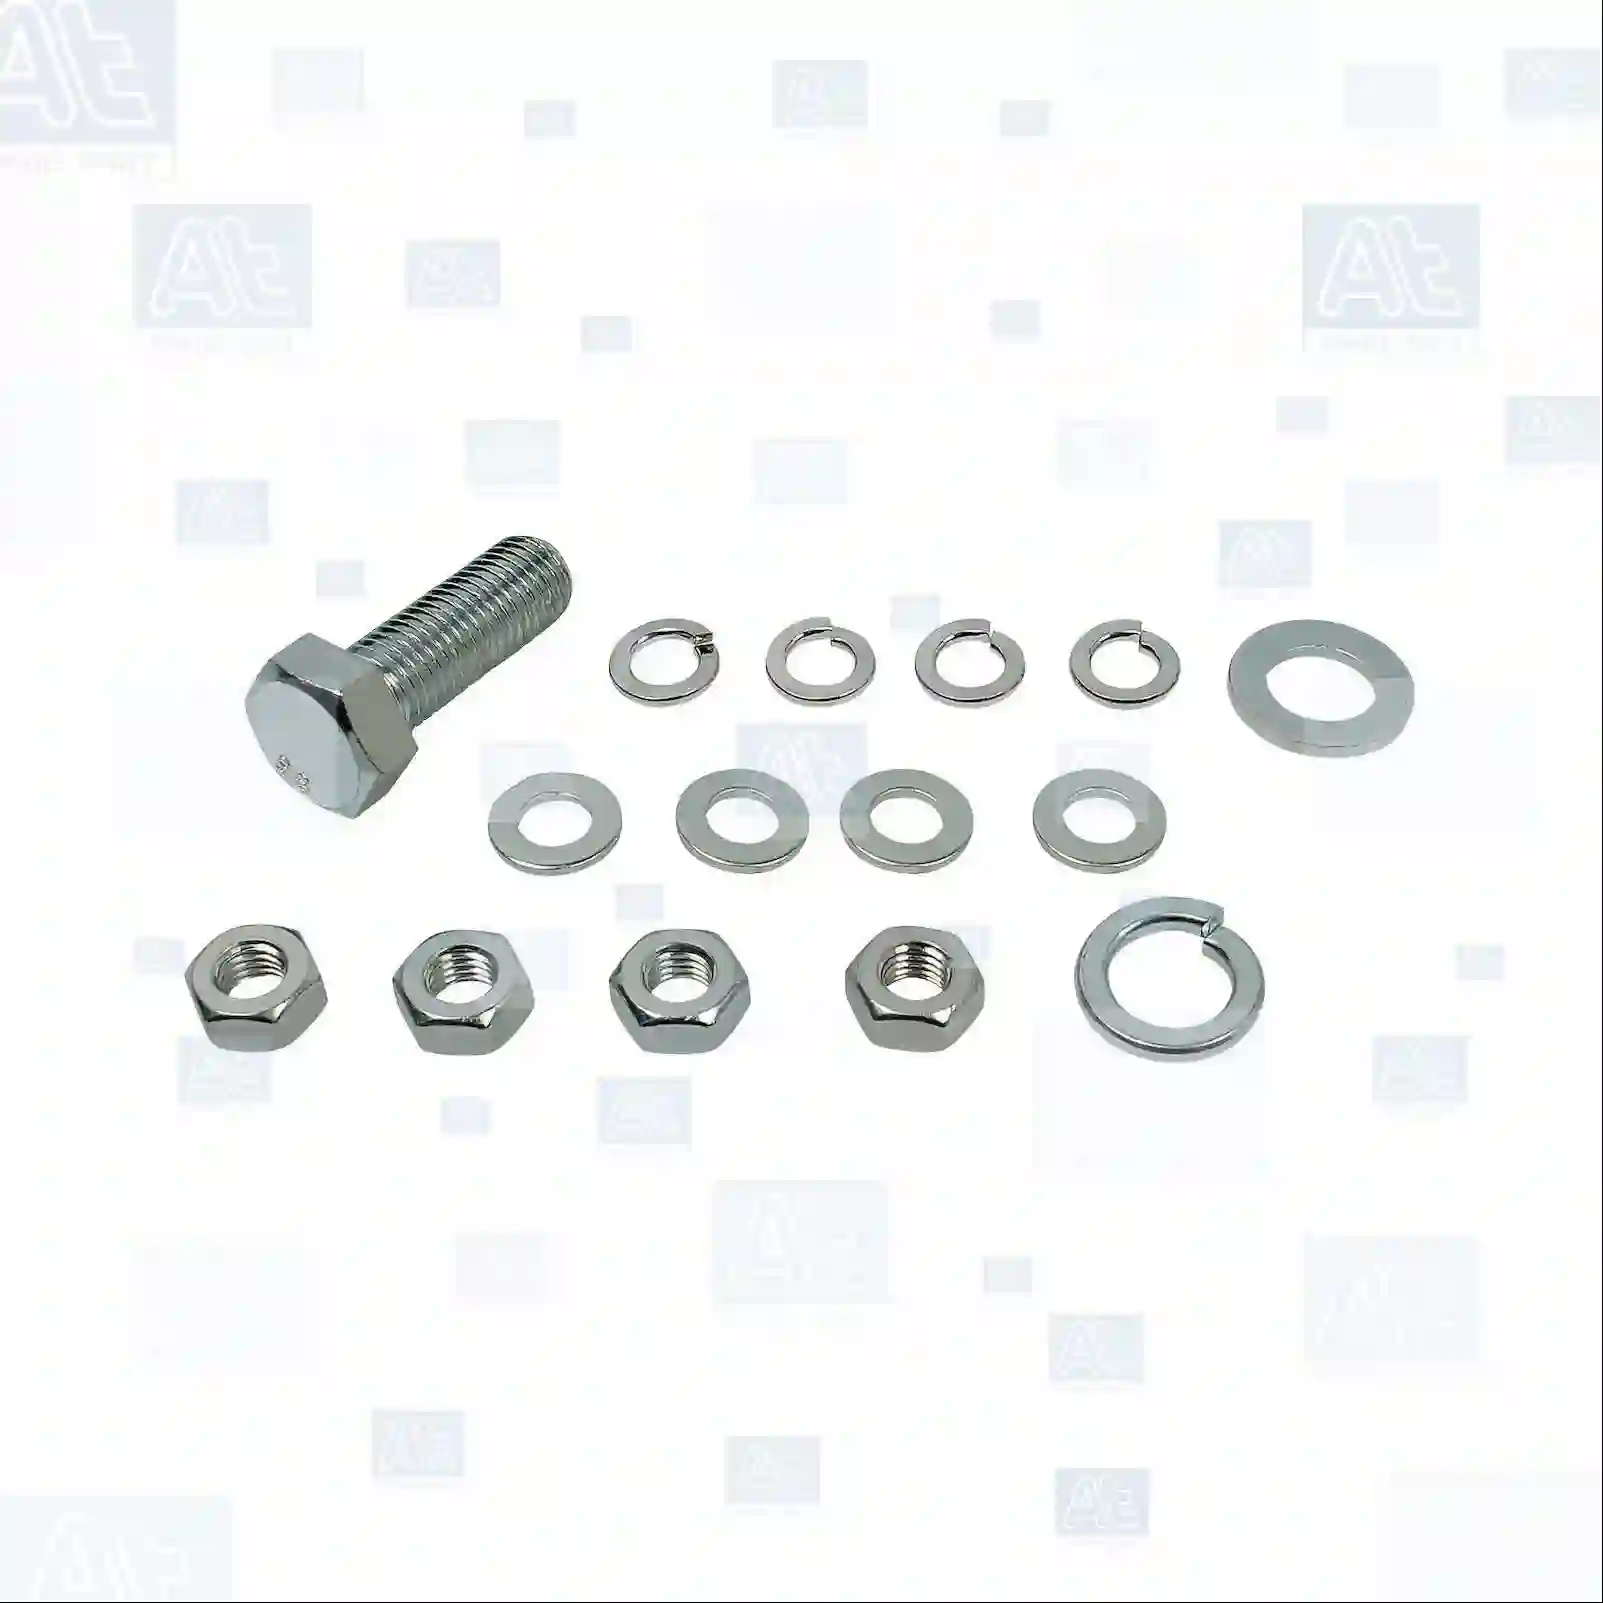 Mounting kit, air spring, 77727484, 0297721S, 0377498S, 0388165S, 0388166S, 0388167S, 0388168S, 0392011S, 0392022S, 0526651S, 1141525S, 1154759S, 1154761S, 1240503S, 1266381S, 1266382S, 1279141S, 1697678S, 1697682S, 1697684S, 1697685S, 1698434S, 297721S, 377498S, 388165S, 388166S, 388167S, 388168S, 392011S, 392022S, 526651S, MLF7053S, MLF7054S, MLF7056S, MLF7059S, MLF7060S, MLF7172S ||  77727484 At Spare Part | Engine, Accelerator Pedal, Camshaft, Connecting Rod, Crankcase, Crankshaft, Cylinder Head, Engine Suspension Mountings, Exhaust Manifold, Exhaust Gas Recirculation, Filter Kits, Flywheel Housing, General Overhaul Kits, Engine, Intake Manifold, Oil Cleaner, Oil Cooler, Oil Filter, Oil Pump, Oil Sump, Piston & Liner, Sensor & Switch, Timing Case, Turbocharger, Cooling System, Belt Tensioner, Coolant Filter, Coolant Pipe, Corrosion Prevention Agent, Drive, Expansion Tank, Fan, Intercooler, Monitors & Gauges, Radiator, Thermostat, V-Belt / Timing belt, Water Pump, Fuel System, Electronical Injector Unit, Feed Pump, Fuel Filter, cpl., Fuel Gauge Sender,  Fuel Line, Fuel Pump, Fuel Tank, Injection Line Kit, Injection Pump, Exhaust System, Clutch & Pedal, Gearbox, Propeller Shaft, Axles, Brake System, Hubs & Wheels, Suspension, Leaf Spring, Universal Parts / Accessories, Steering, Electrical System, Cabin Mounting kit, air spring, 77727484, 0297721S, 0377498S, 0388165S, 0388166S, 0388167S, 0388168S, 0392011S, 0392022S, 0526651S, 1141525S, 1154759S, 1154761S, 1240503S, 1266381S, 1266382S, 1279141S, 1697678S, 1697682S, 1697684S, 1697685S, 1698434S, 297721S, 377498S, 388165S, 388166S, 388167S, 388168S, 392011S, 392022S, 526651S, MLF7053S, MLF7054S, MLF7056S, MLF7059S, MLF7060S, MLF7172S ||  77727484 At Spare Part | Engine, Accelerator Pedal, Camshaft, Connecting Rod, Crankcase, Crankshaft, Cylinder Head, Engine Suspension Mountings, Exhaust Manifold, Exhaust Gas Recirculation, Filter Kits, Flywheel Housing, General Overhaul Kits, Engine, Intake Manifold, Oil Cleaner, Oil Cooler, Oil Filter, Oil Pump, Oil Sump, Piston & Liner, Sensor & Switch, Timing Case, Turbocharger, Cooling System, Belt Tensioner, Coolant Filter, Coolant Pipe, Corrosion Prevention Agent, Drive, Expansion Tank, Fan, Intercooler, Monitors & Gauges, Radiator, Thermostat, V-Belt / Timing belt, Water Pump, Fuel System, Electronical Injector Unit, Feed Pump, Fuel Filter, cpl., Fuel Gauge Sender,  Fuel Line, Fuel Pump, Fuel Tank, Injection Line Kit, Injection Pump, Exhaust System, Clutch & Pedal, Gearbox, Propeller Shaft, Axles, Brake System, Hubs & Wheels, Suspension, Leaf Spring, Universal Parts / Accessories, Steering, Electrical System, Cabin